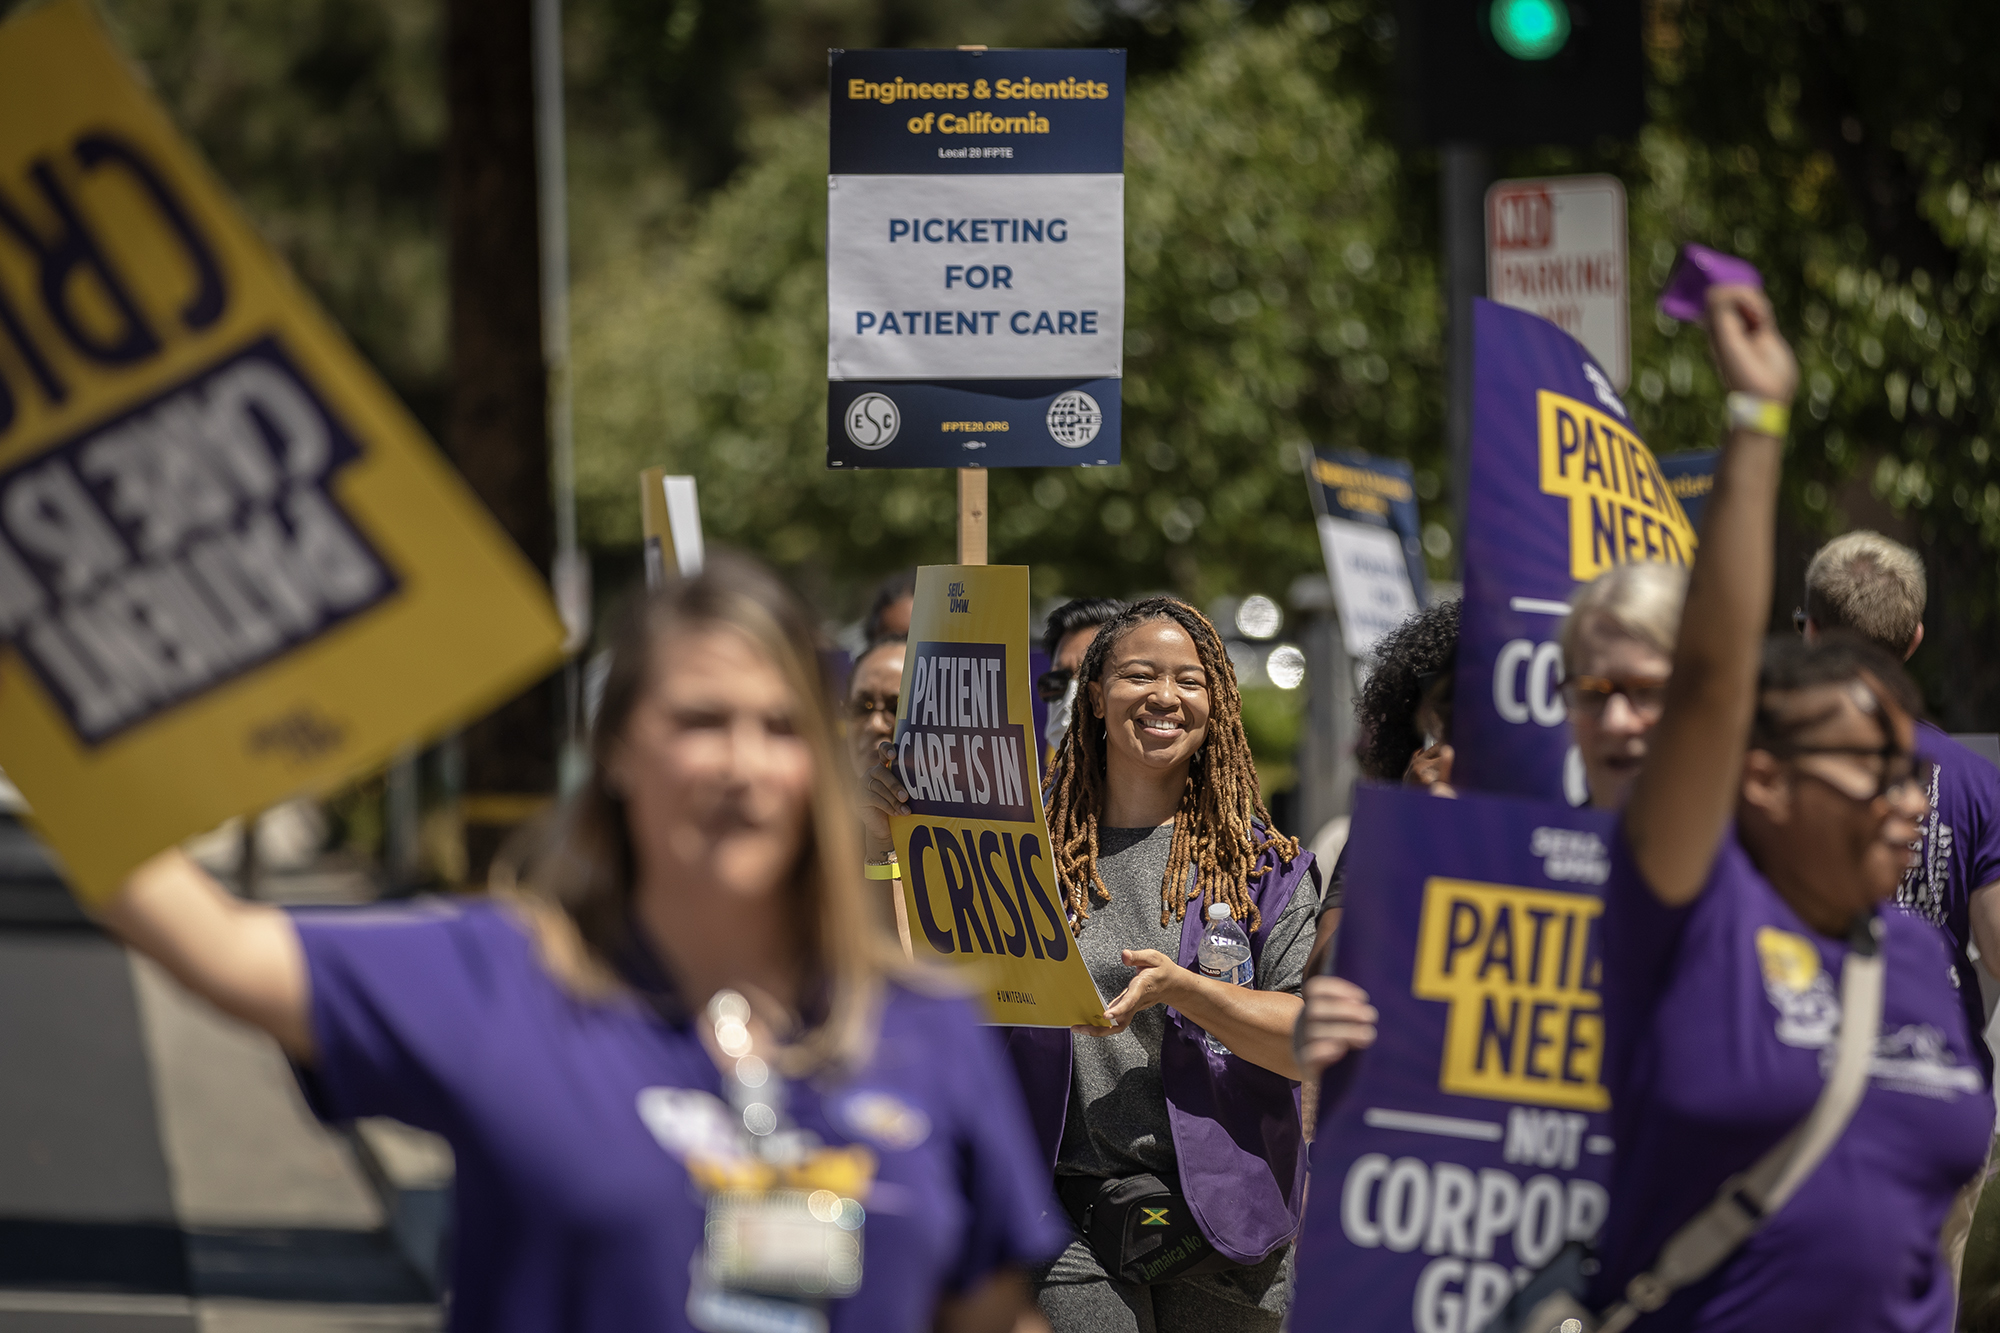 Dozens of health care workers march in protest outside of a Kaiser Permanente building in Sacramento, California. One yellow and black sign reads, "Patient Care Is In Crisis."